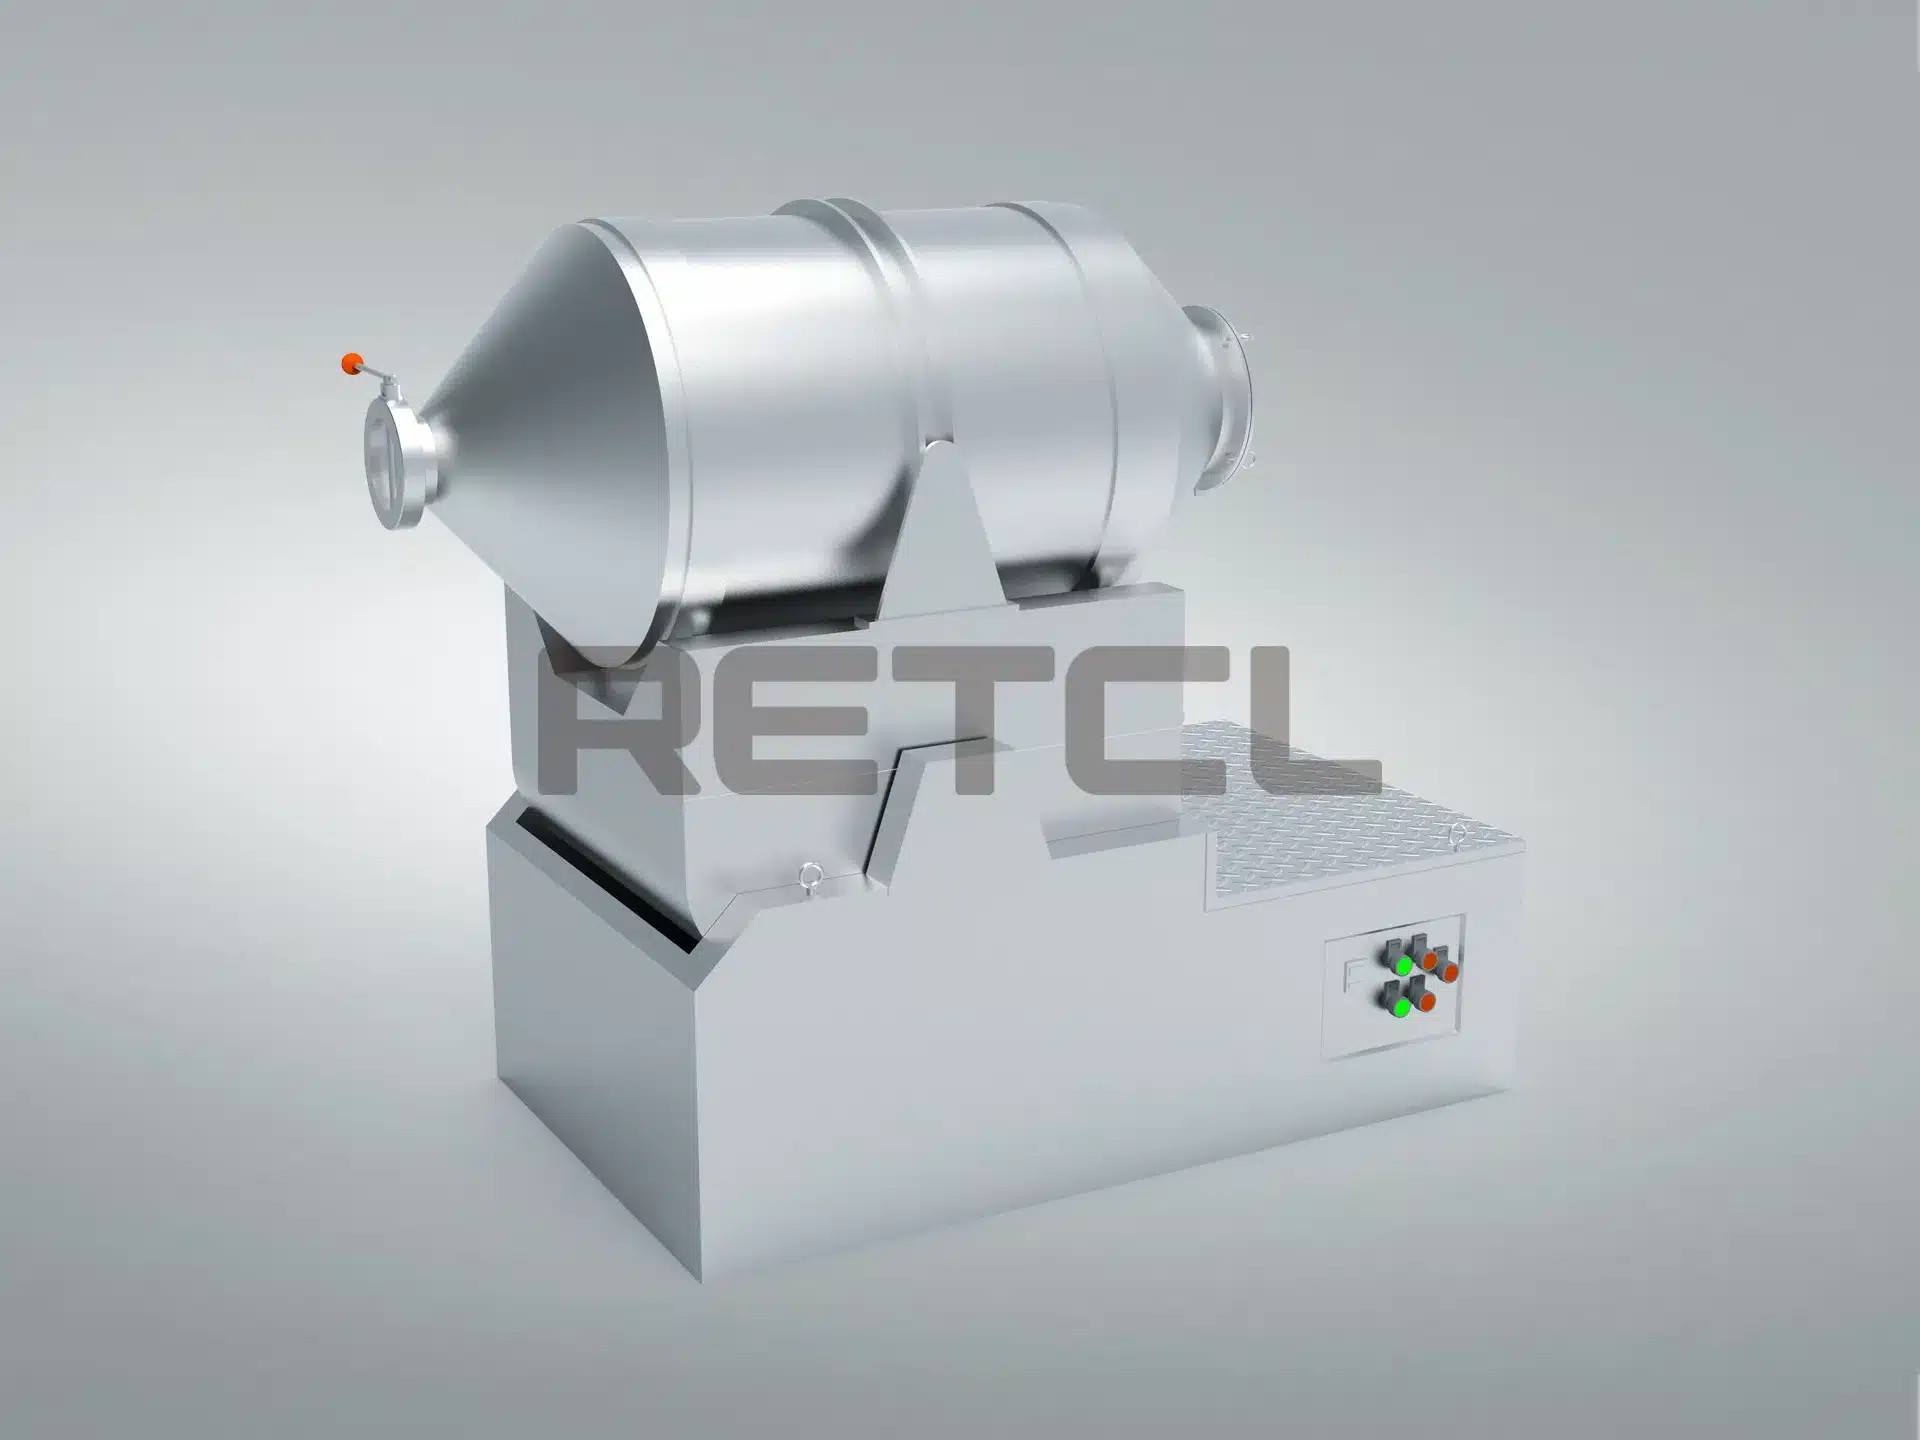 Stainless steel industrial rotary drum mixer machine with mixing blades, on gray background.